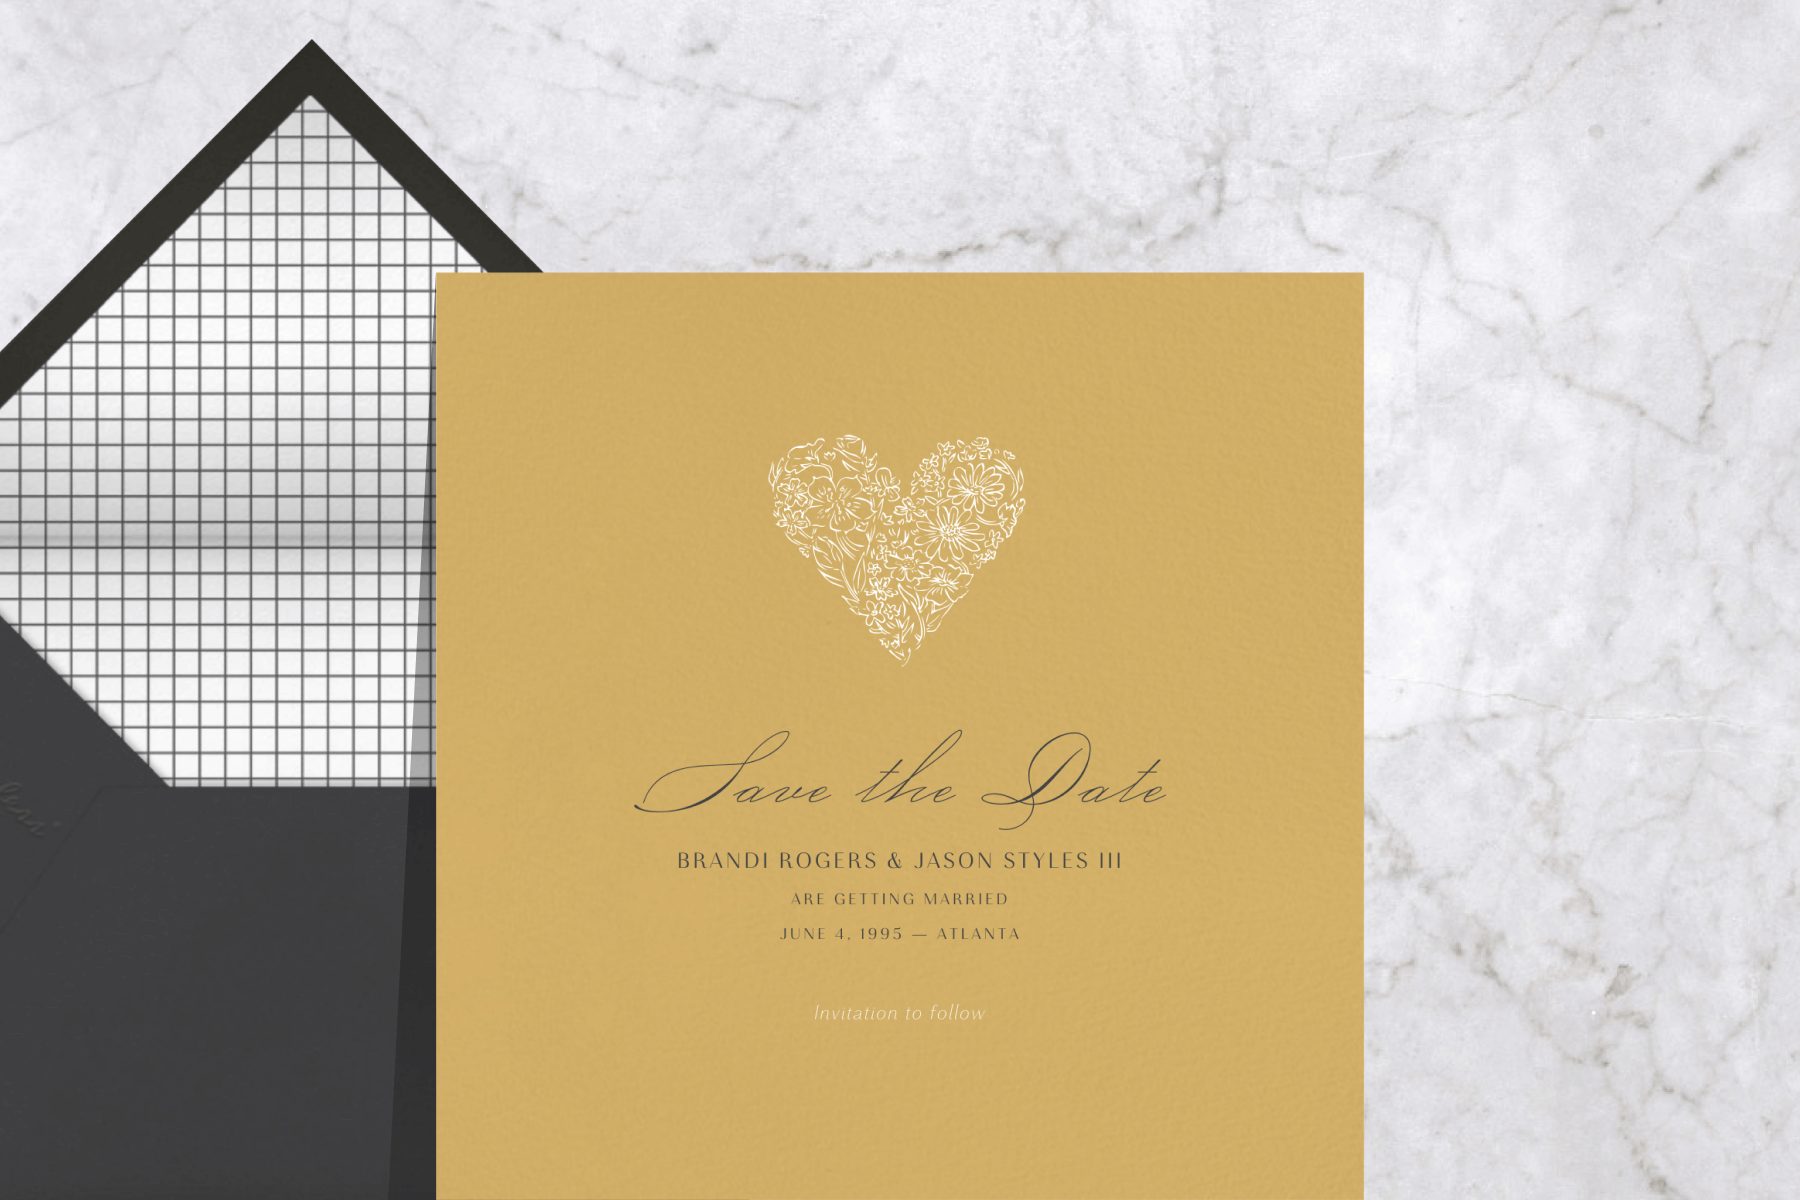 A save the date with a mustard-colored background and heart shape with illustrated flowers.